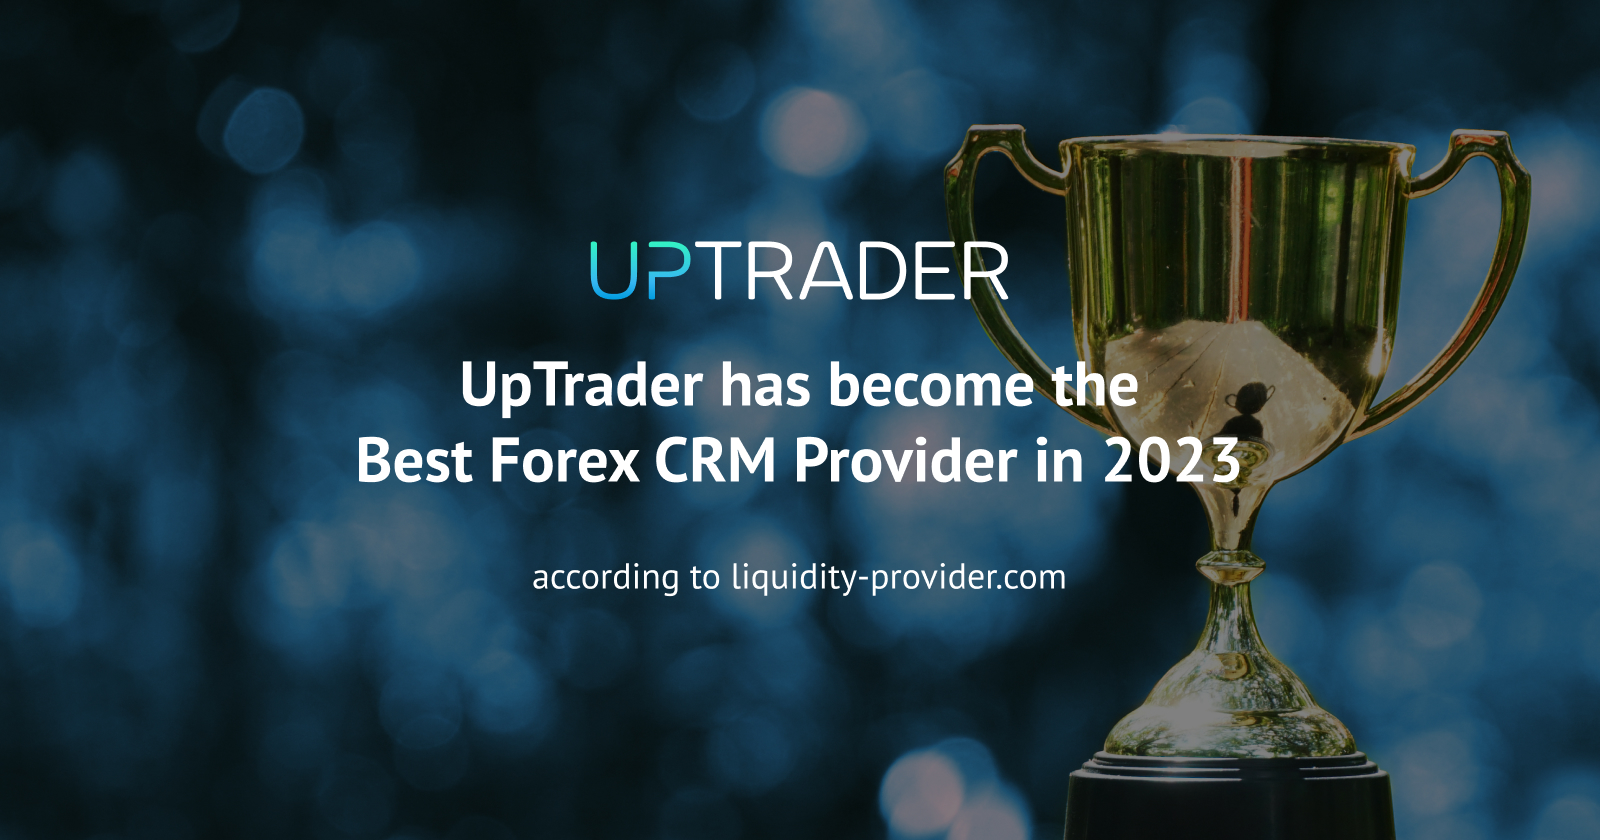 UpTrader has become the Best Forex CRM Provider in 2023